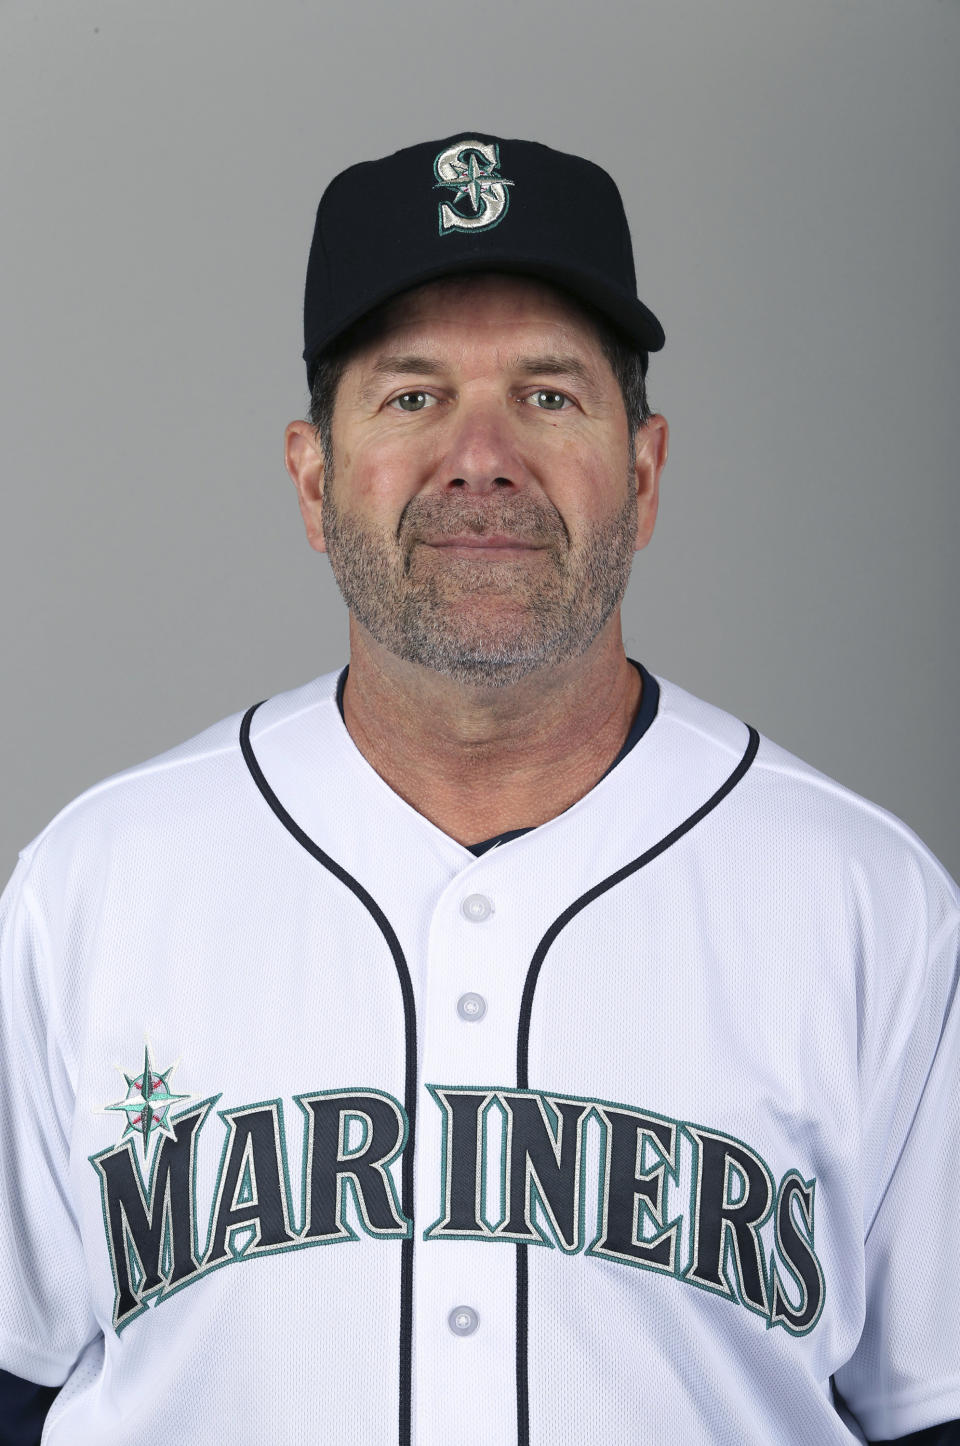 File-This Feb. 21, 2018, file photo shows Edgar Martinez of the Seattle Mariners baseball team. Martinez was a .312 hitter over 18 seasons with Seattle. He got 85.4 percent in his 10th and final try on the writers’ ballot. He and Baines will join 2014 inductee Frank Thomas as the only Hall of Famers to play the majority of their games at designated hitter. David Ortiz will be eligible in 2022. (AP Photo/Ralph Freso, File)